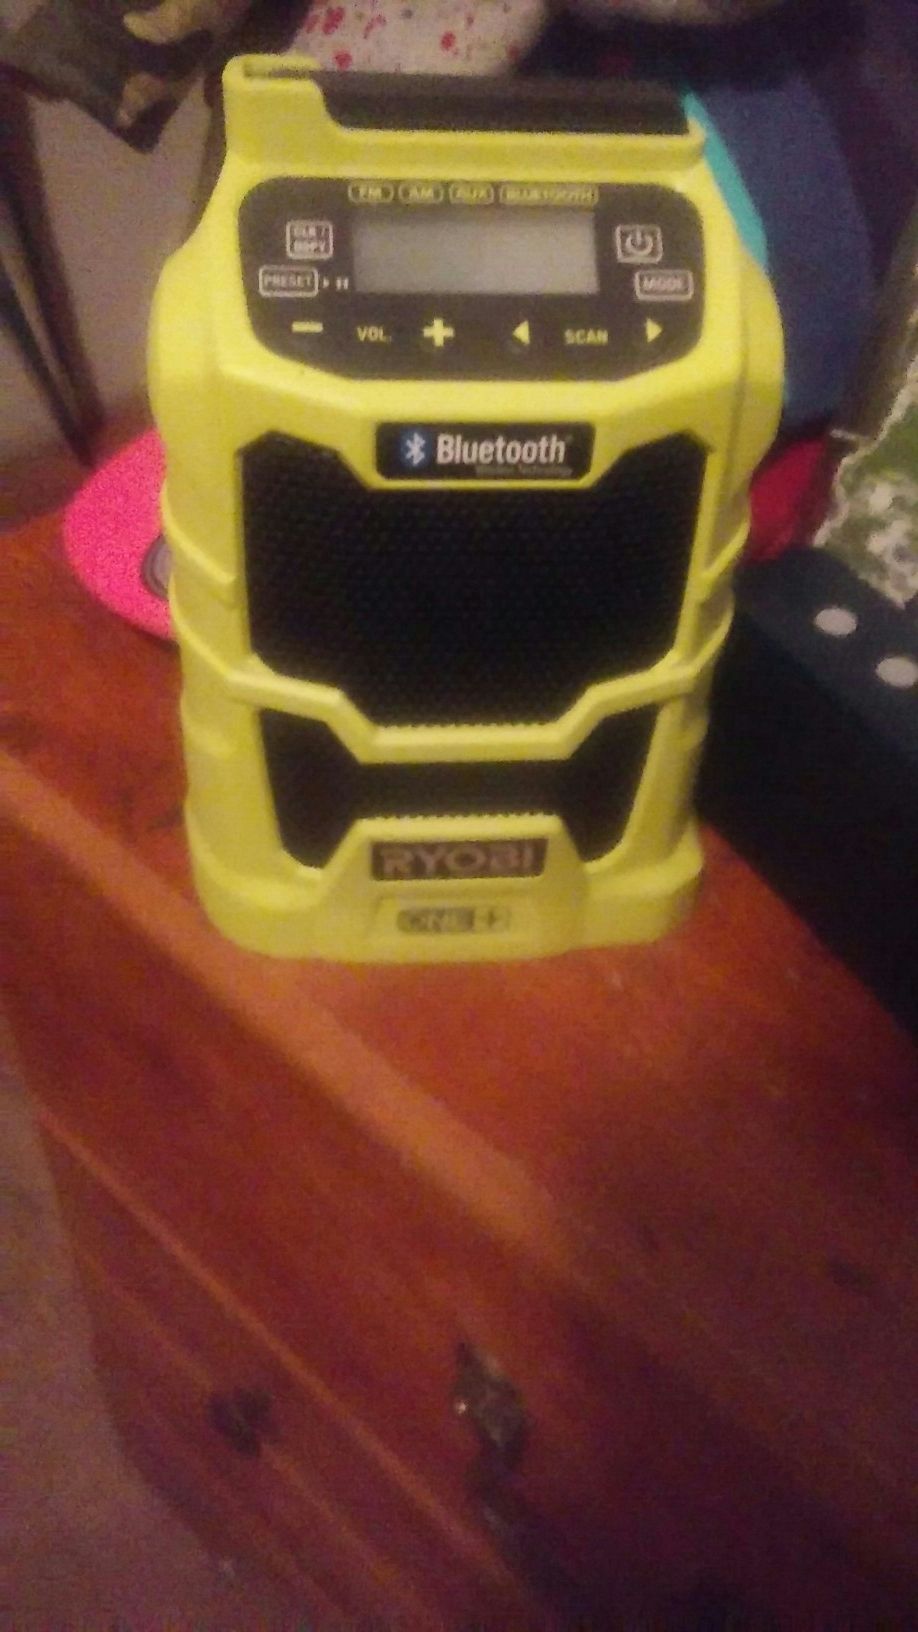 Its a bluethooth speaker. It need a battle pack. Sold as is.